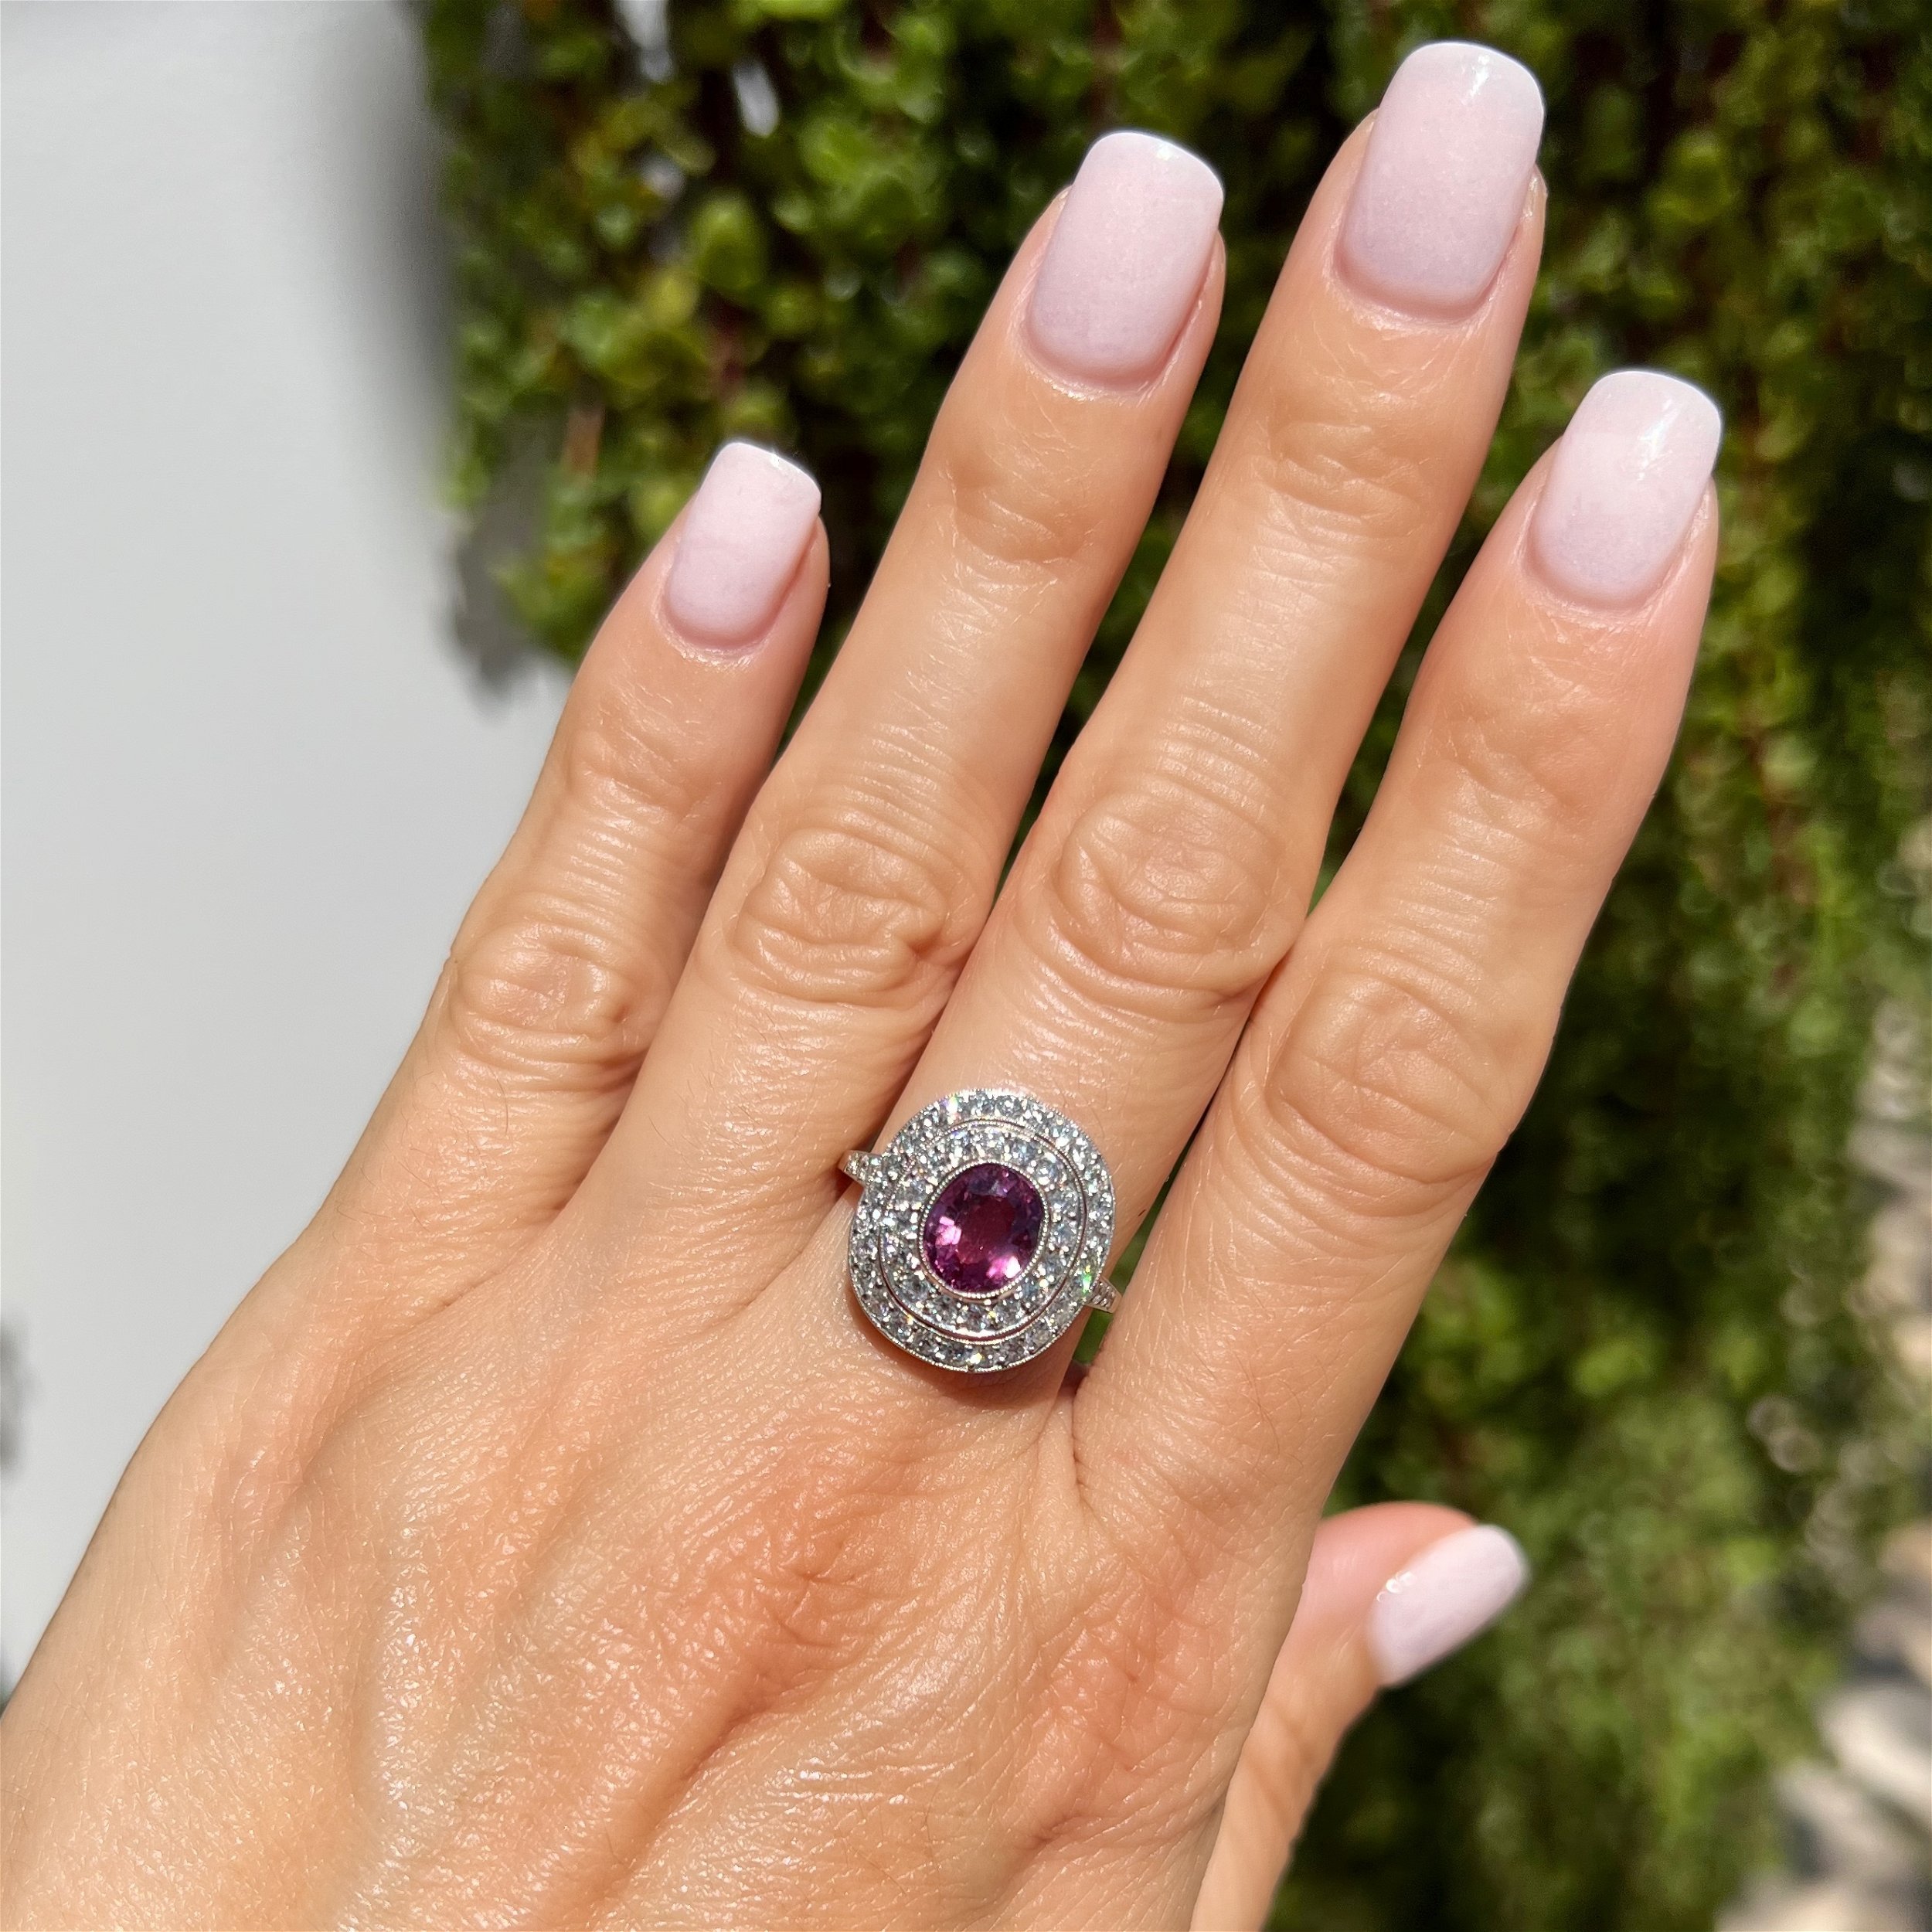 Platinum on 18K 2.48ct Oval Pink Sapphire & 1.10tcw Double Diamond Halo Ring 5.5g, s8.25